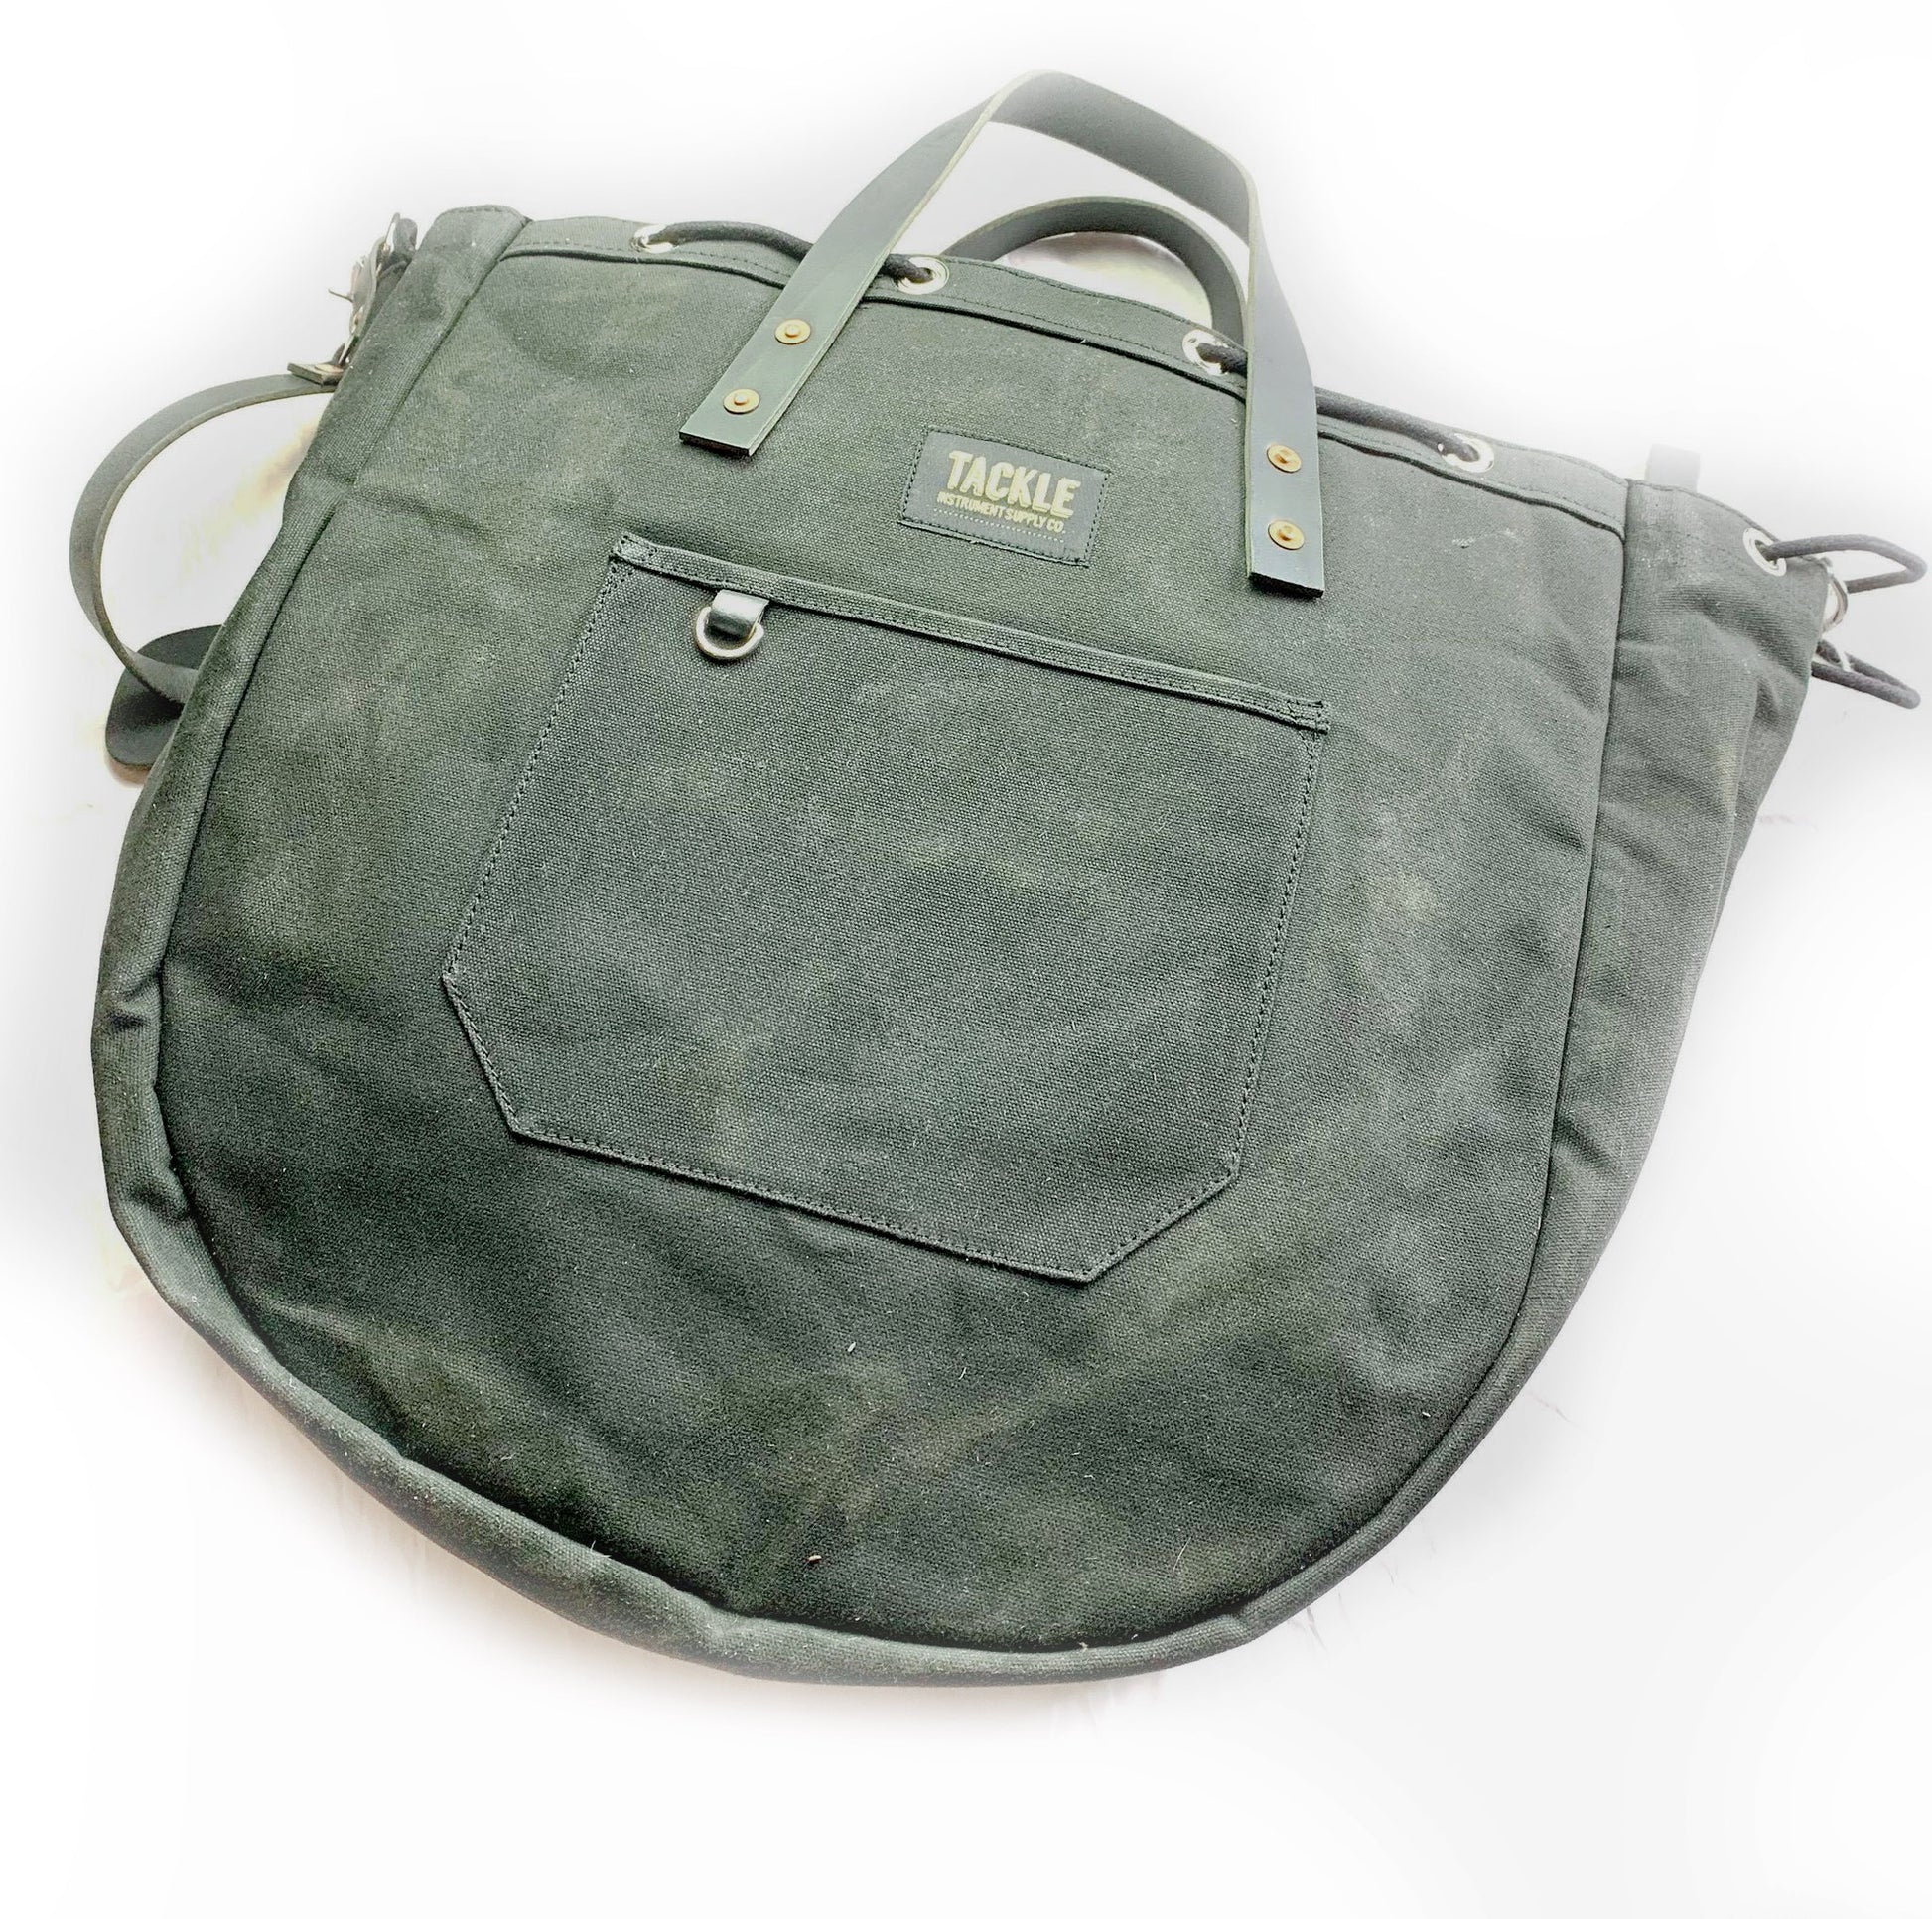 Tackle – Cinch Tight Snare Bag